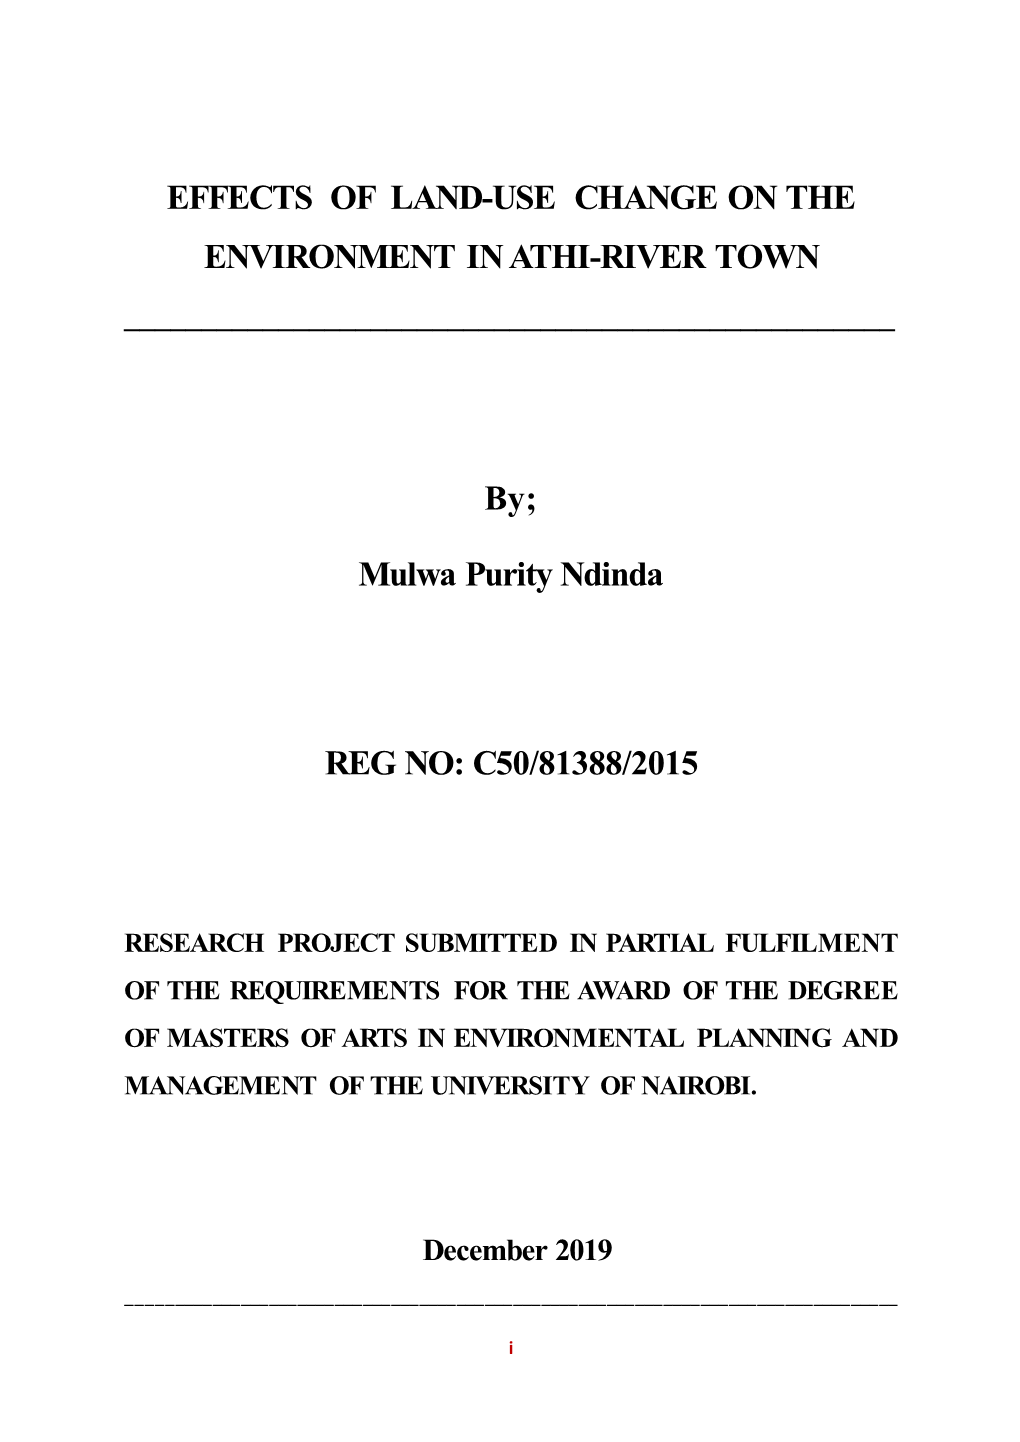 Effects of Land-Use Change on the Environment in Athi-River Town ______